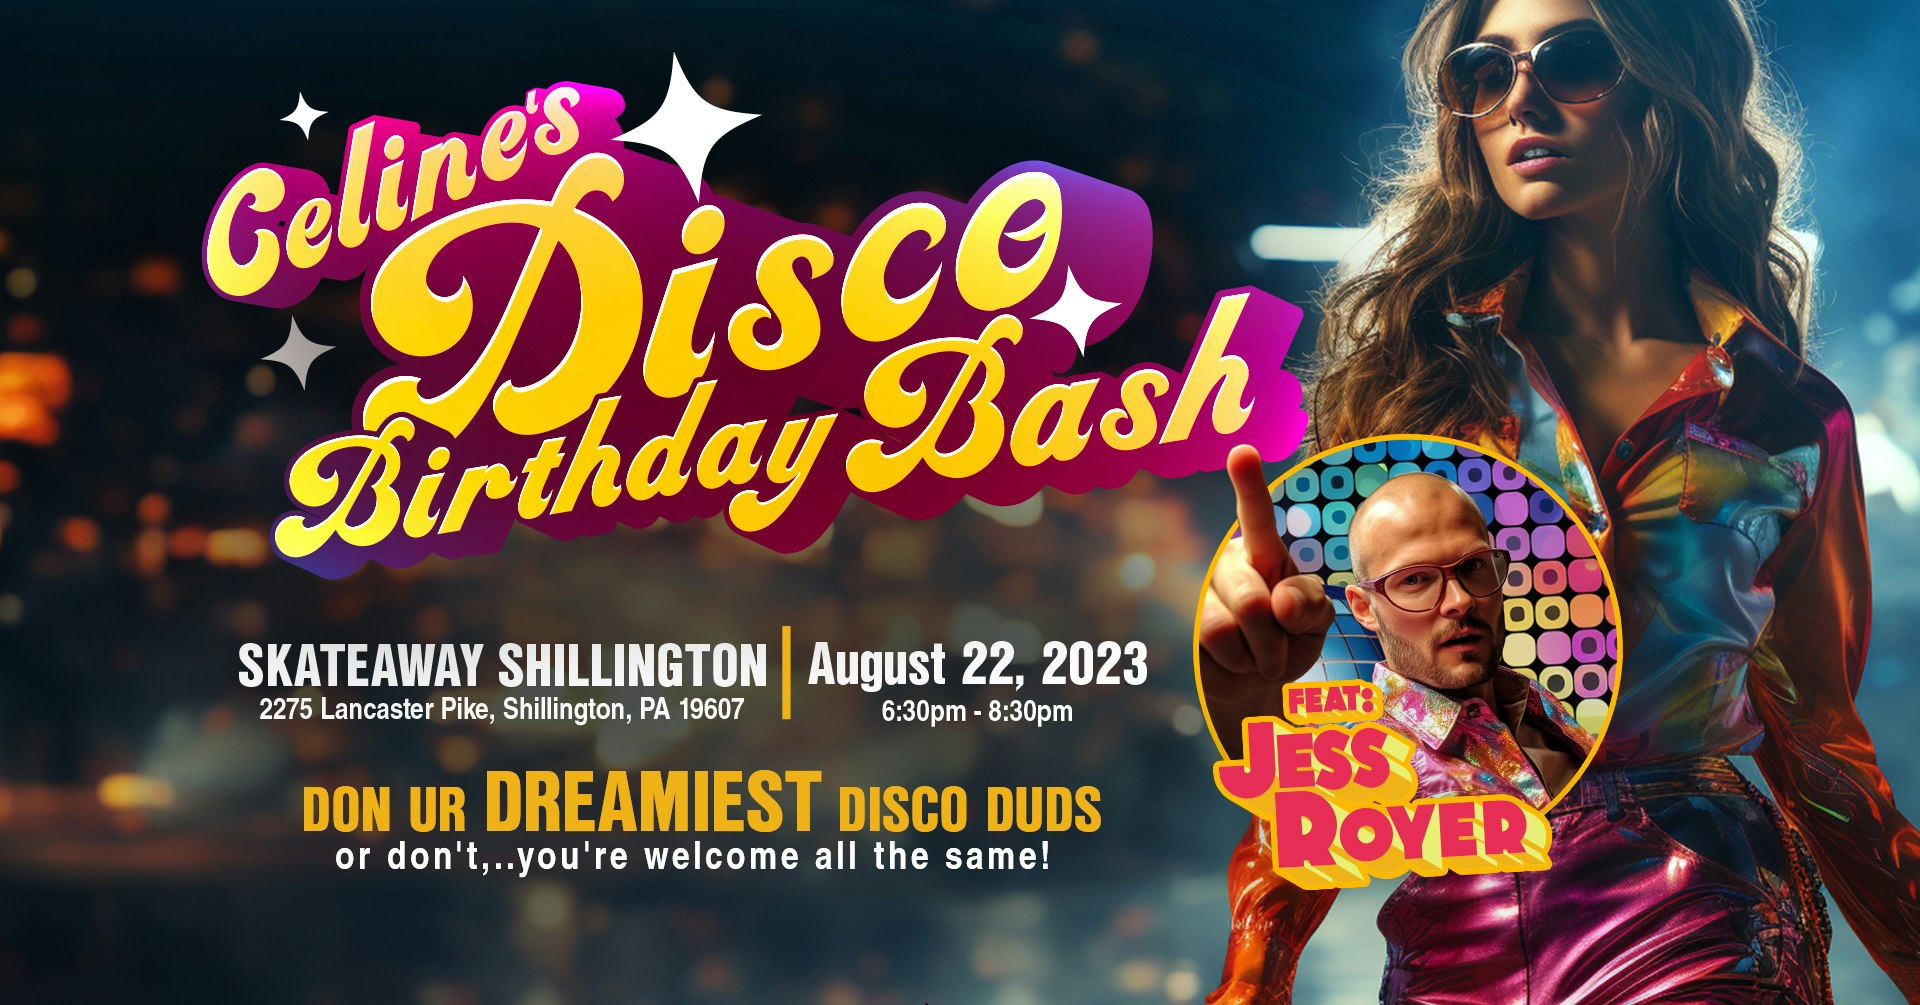 Celine's Disco Birthday Bash feat. Jess Royer · People's Action